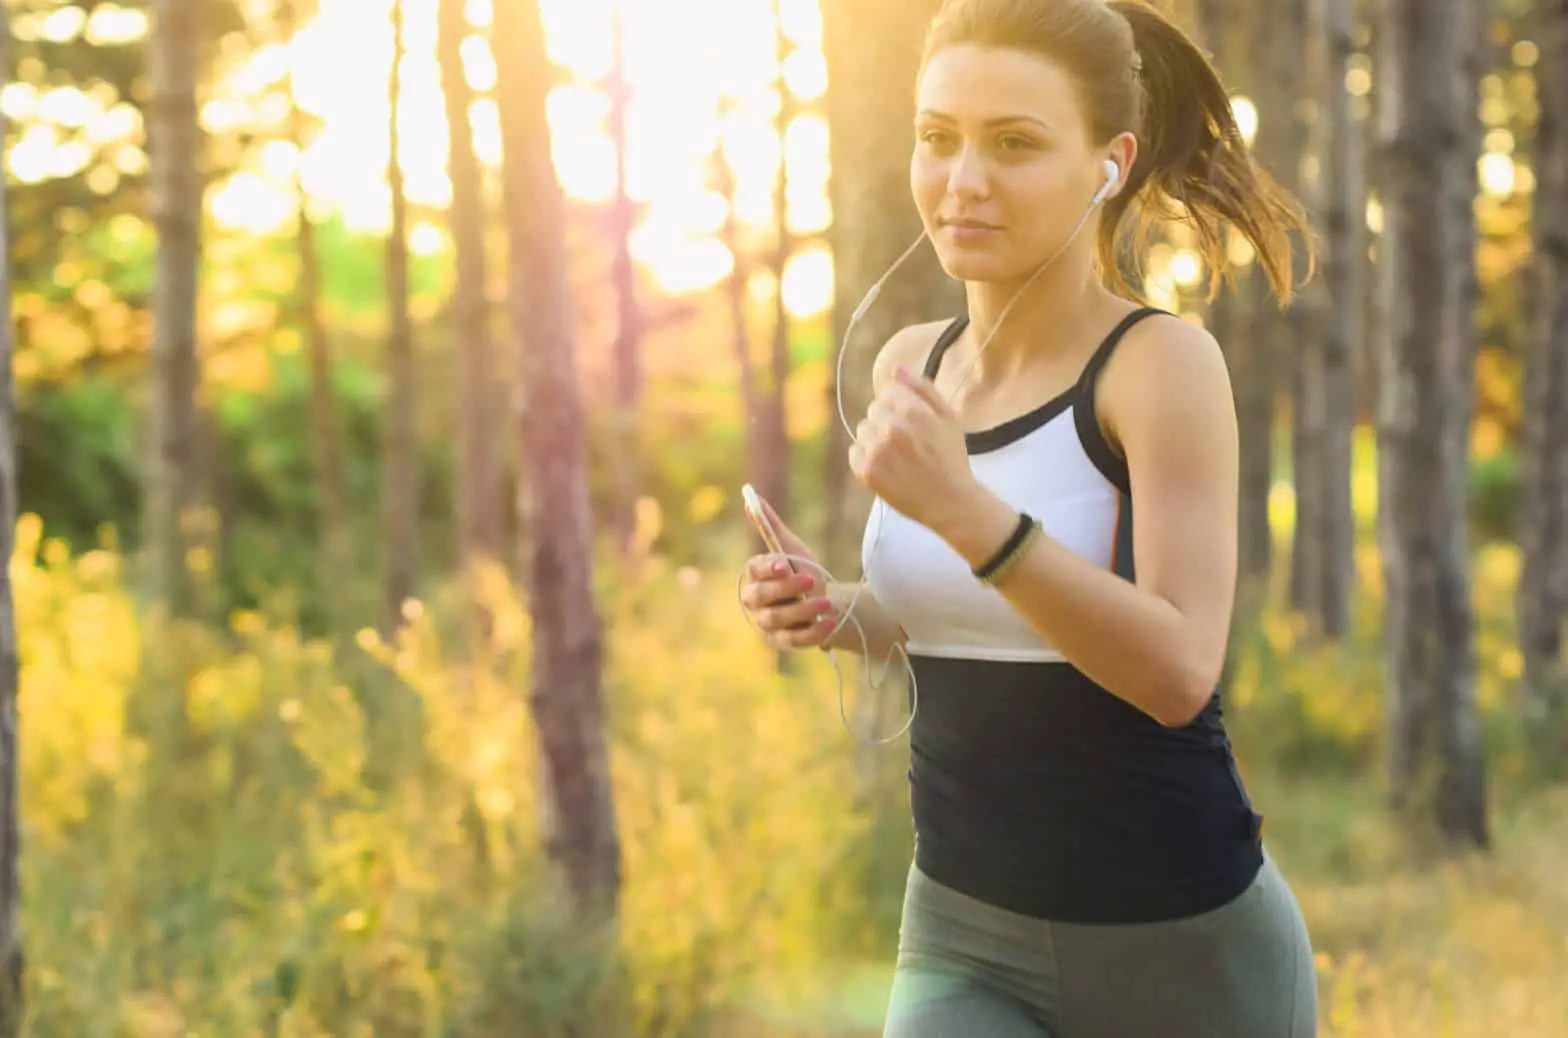 A woman jogging in the woods because she knows the importance of having a cardio exercise routine